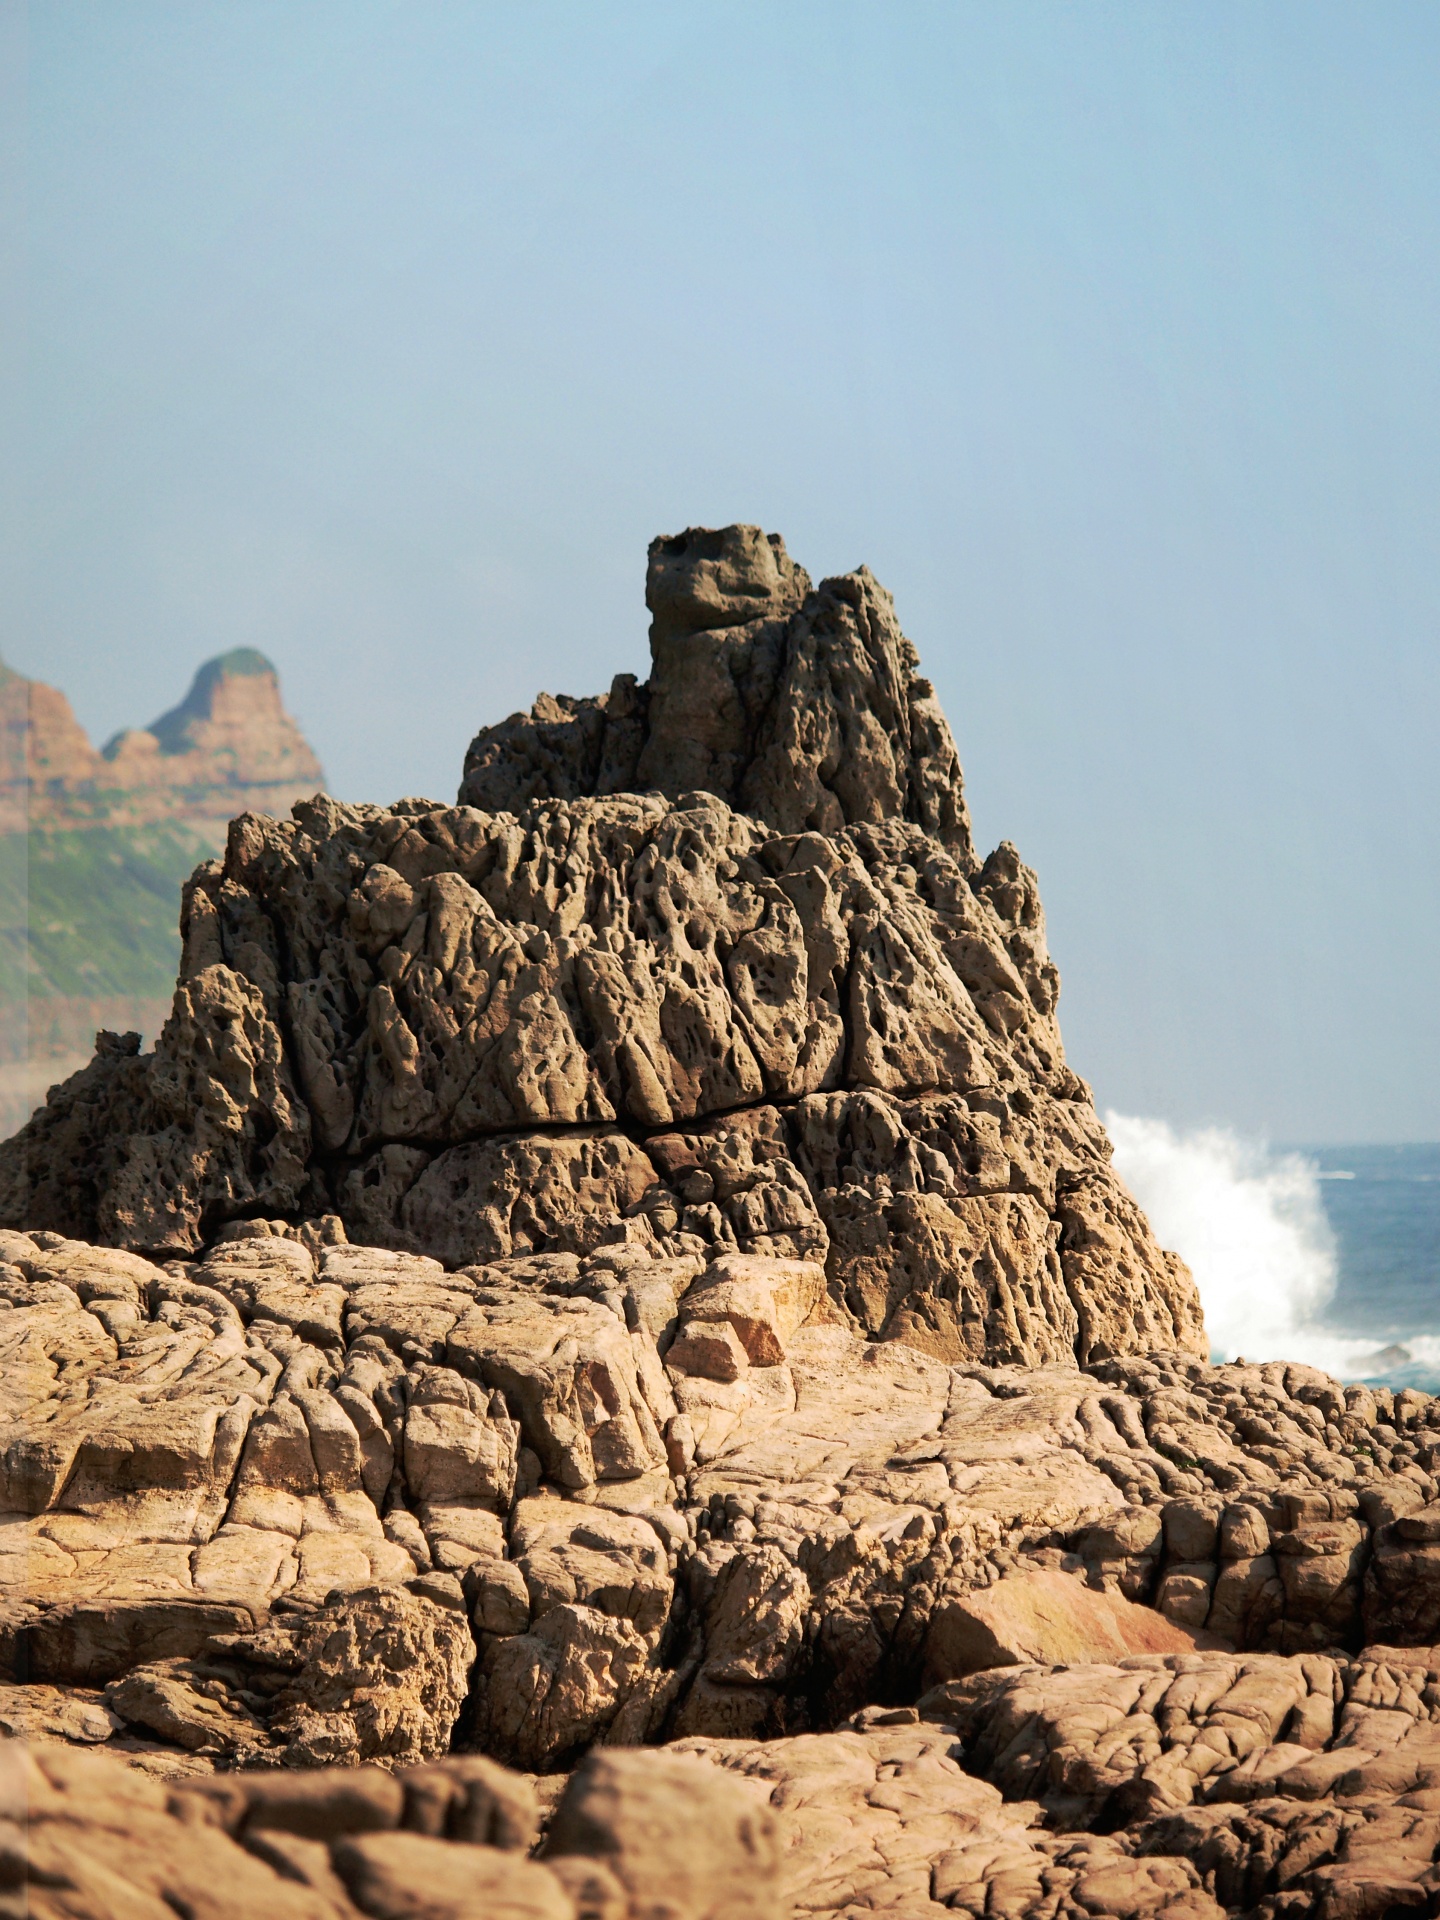 Weathered rocks in Gongliao district on the north-east coast of Taiwan, a place of strong winds and choppy seas